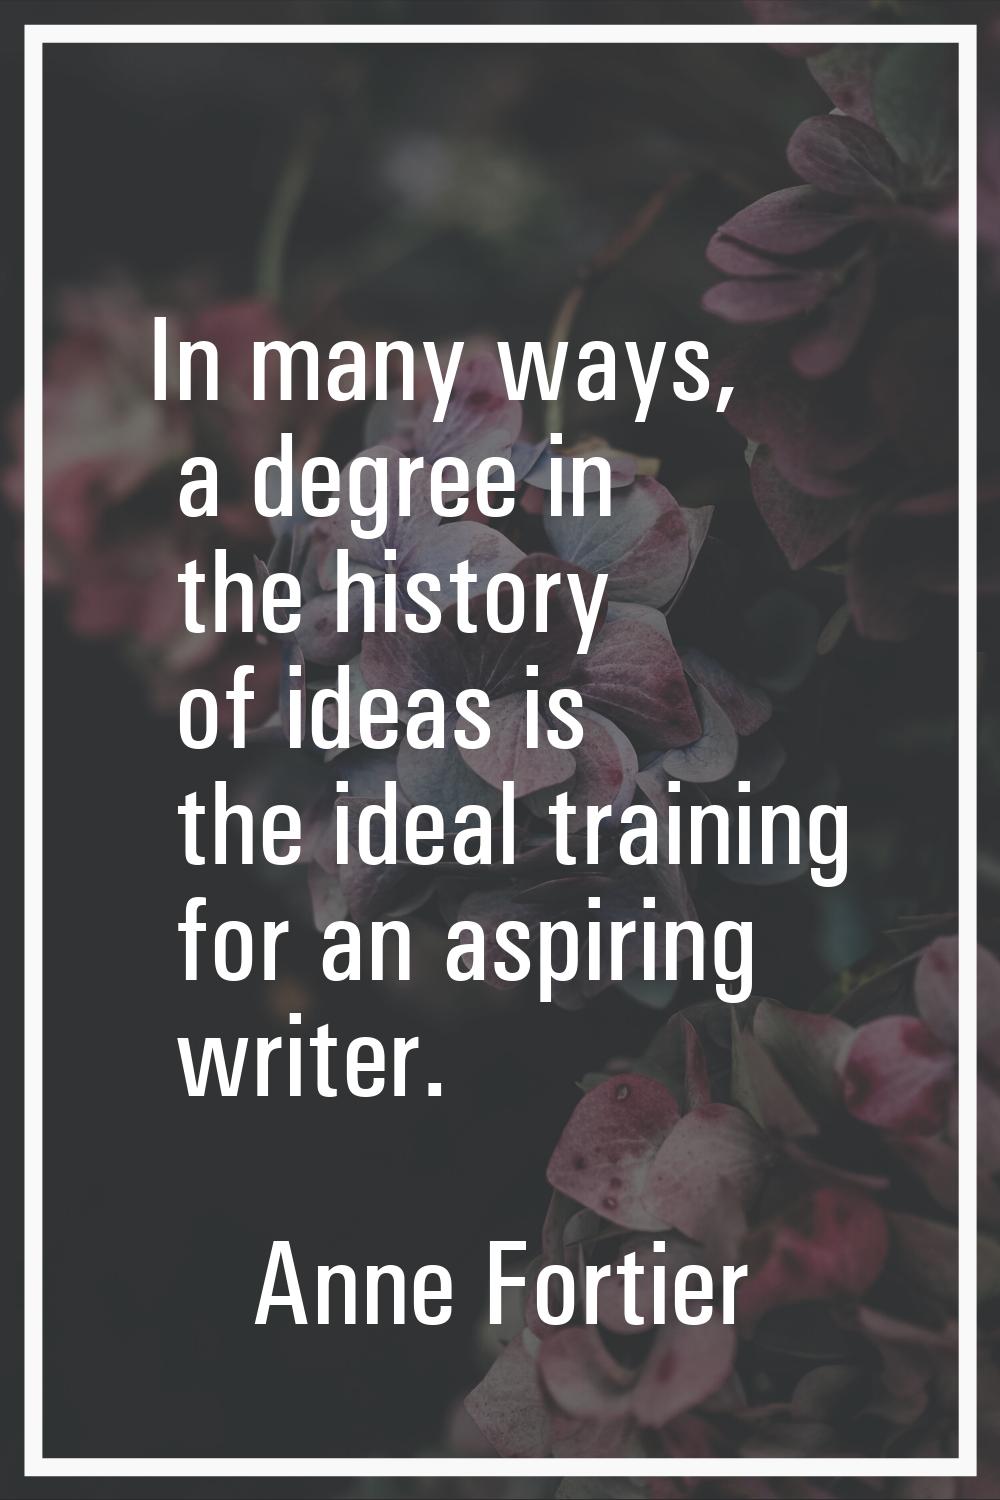 In many ways, a degree in the history of ideas is the ideal training for an aspiring writer.